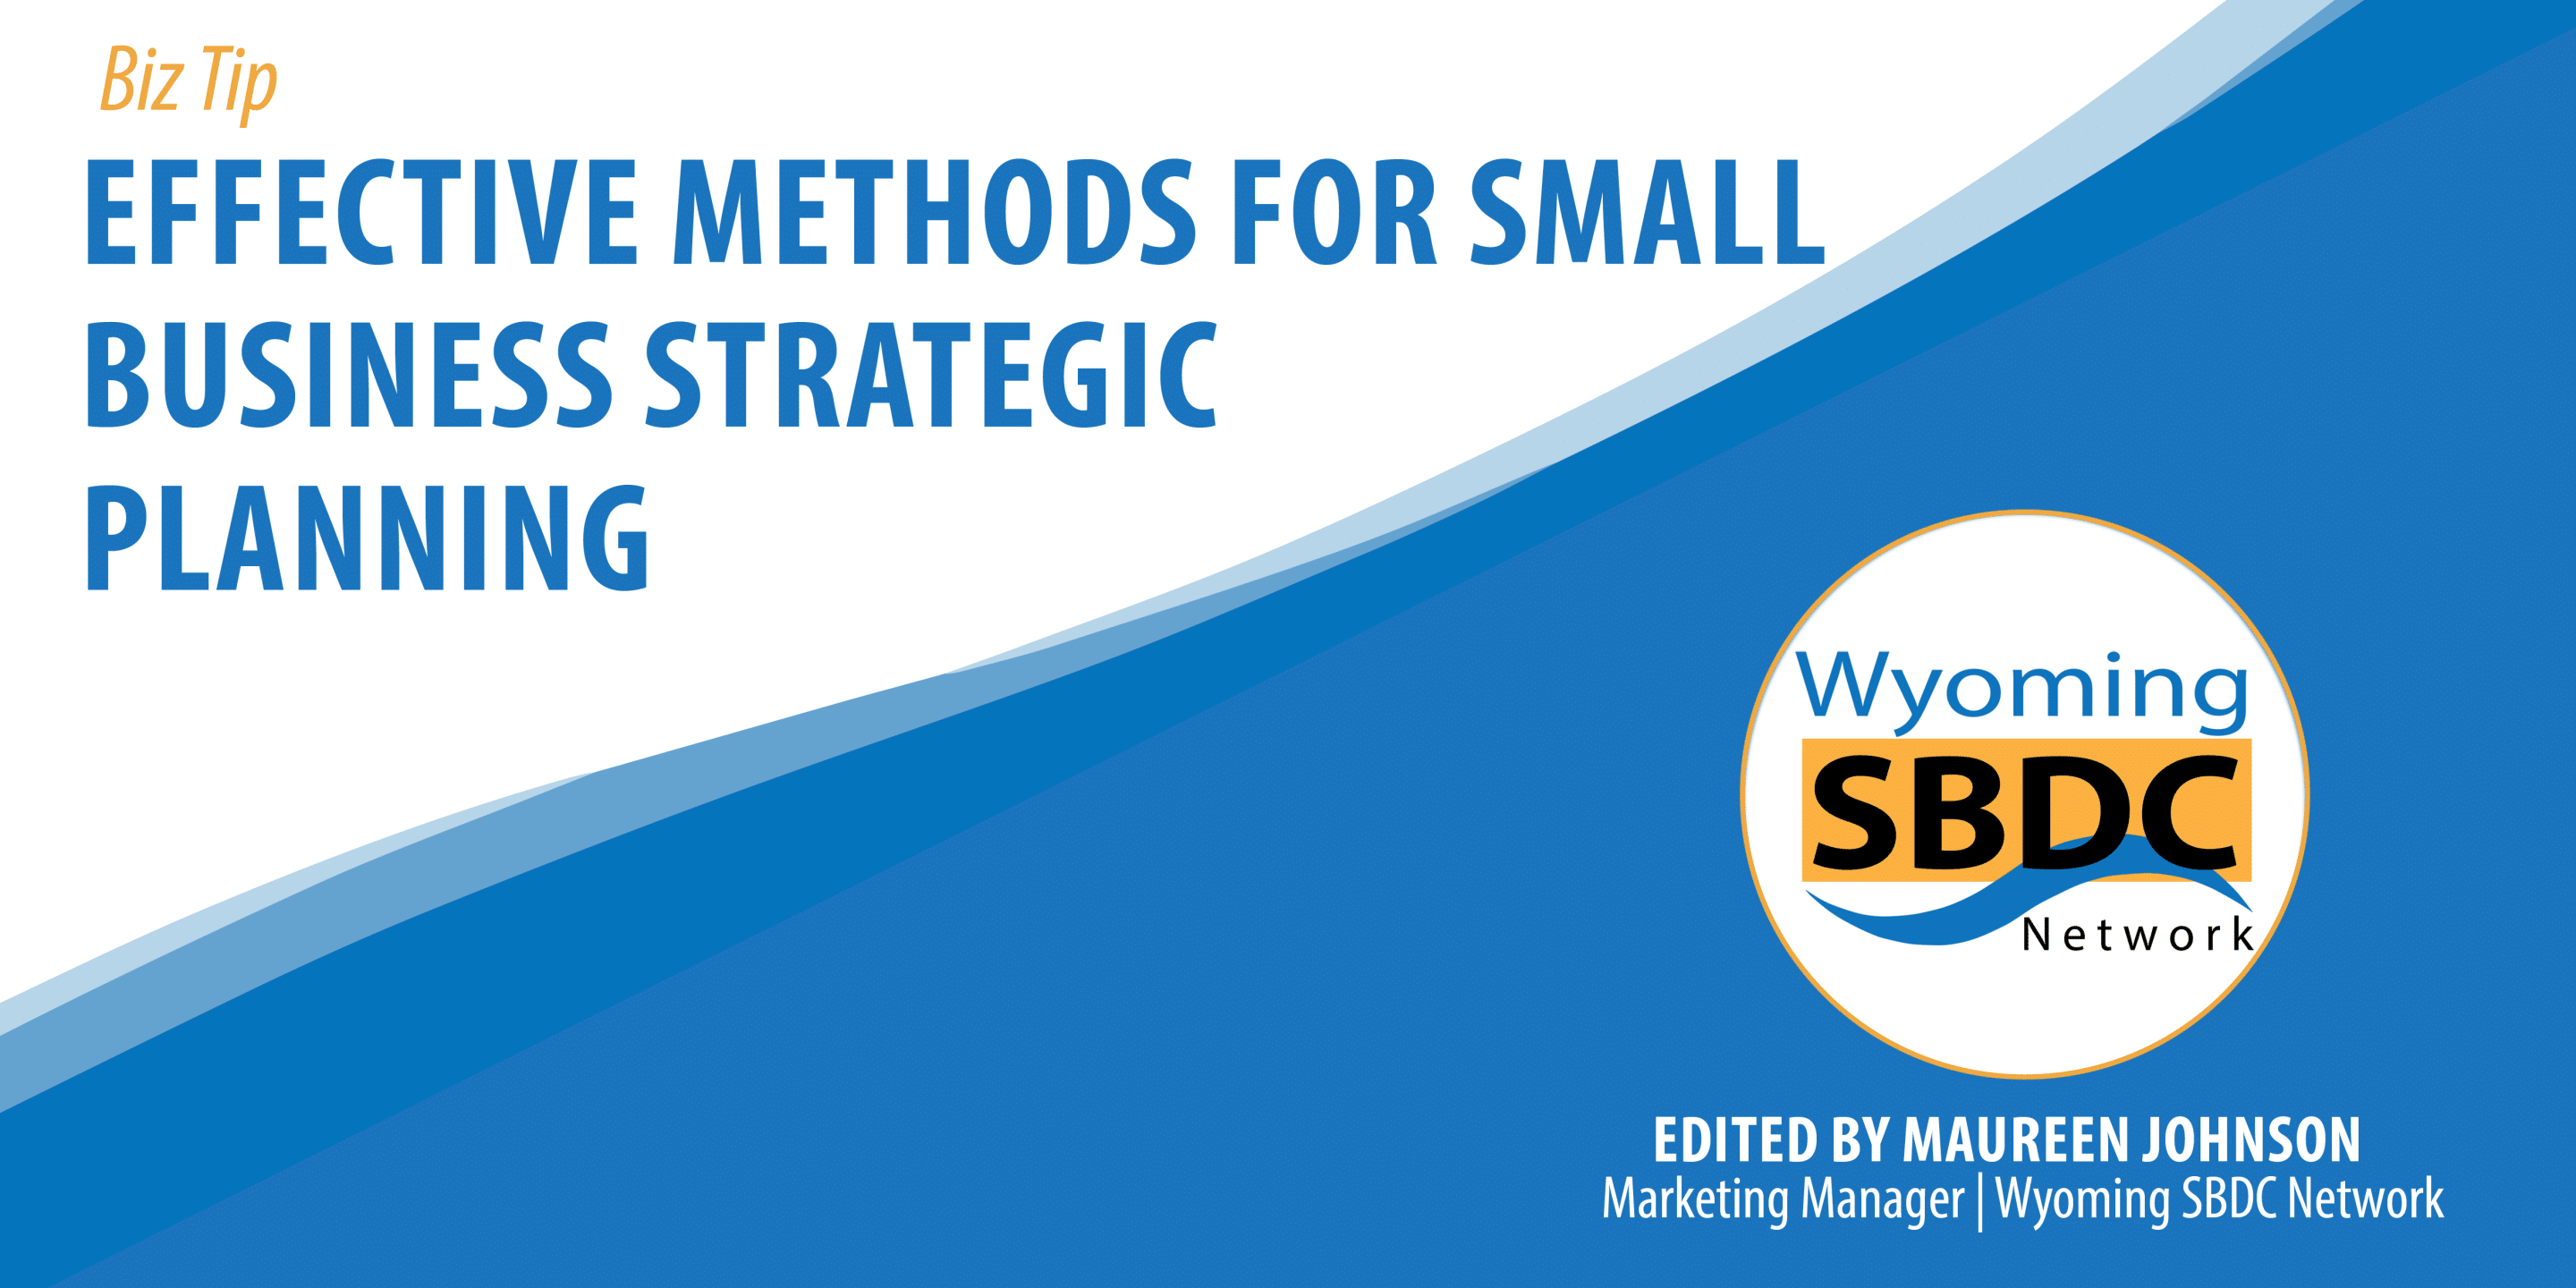 Effective Methods for Small Business Strategic Planning